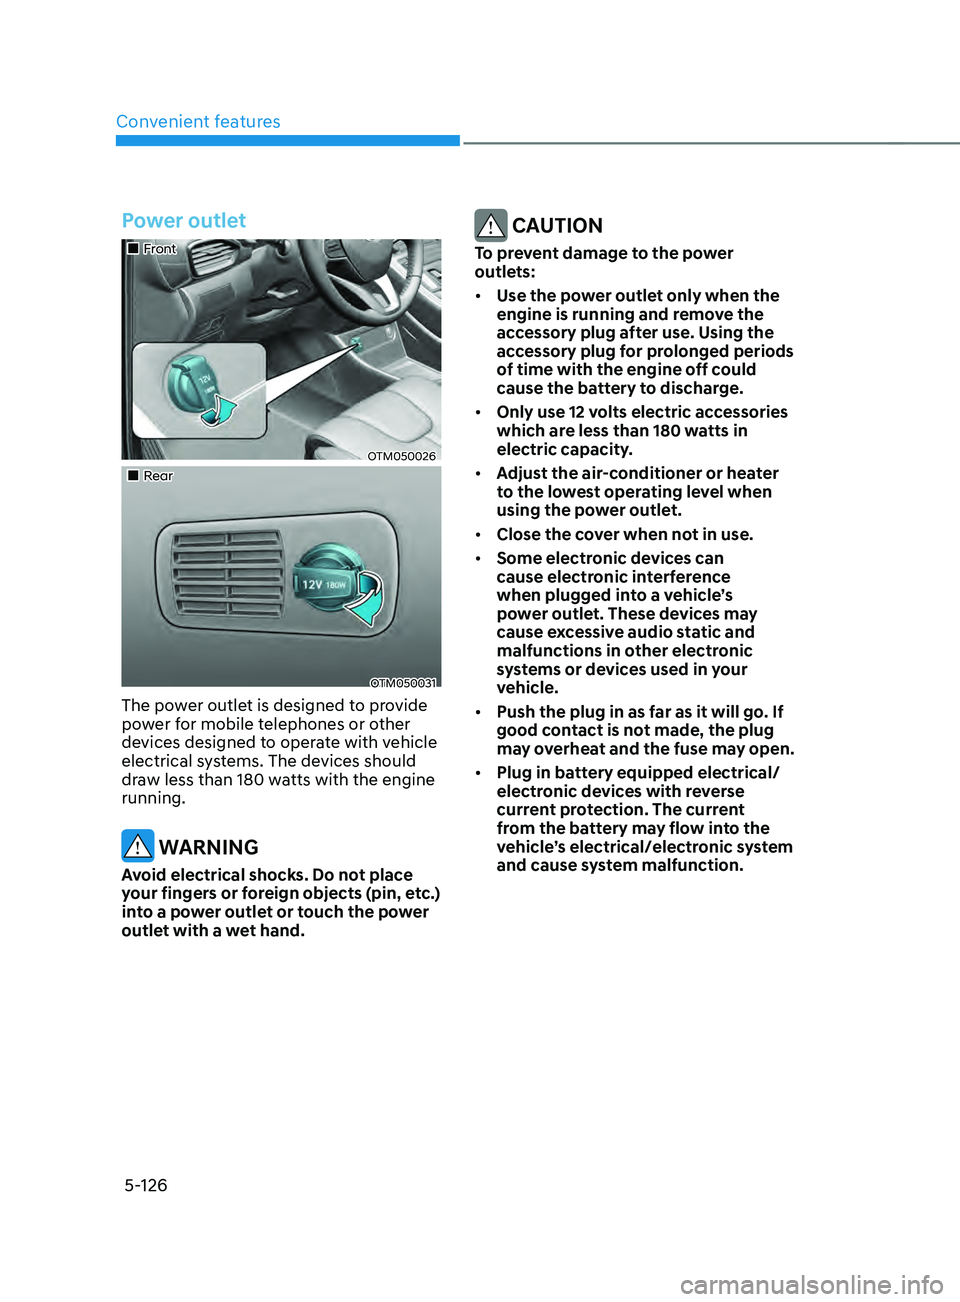 HYUNDAI SANTA FE 2021  Owners Manual Convenient features
5-126
Power outlet
„„Front
OTM050026
„„Rear
OTM050031
The power outlet is designed to provide 
power for mobile telephones or other 
devices designed to operate